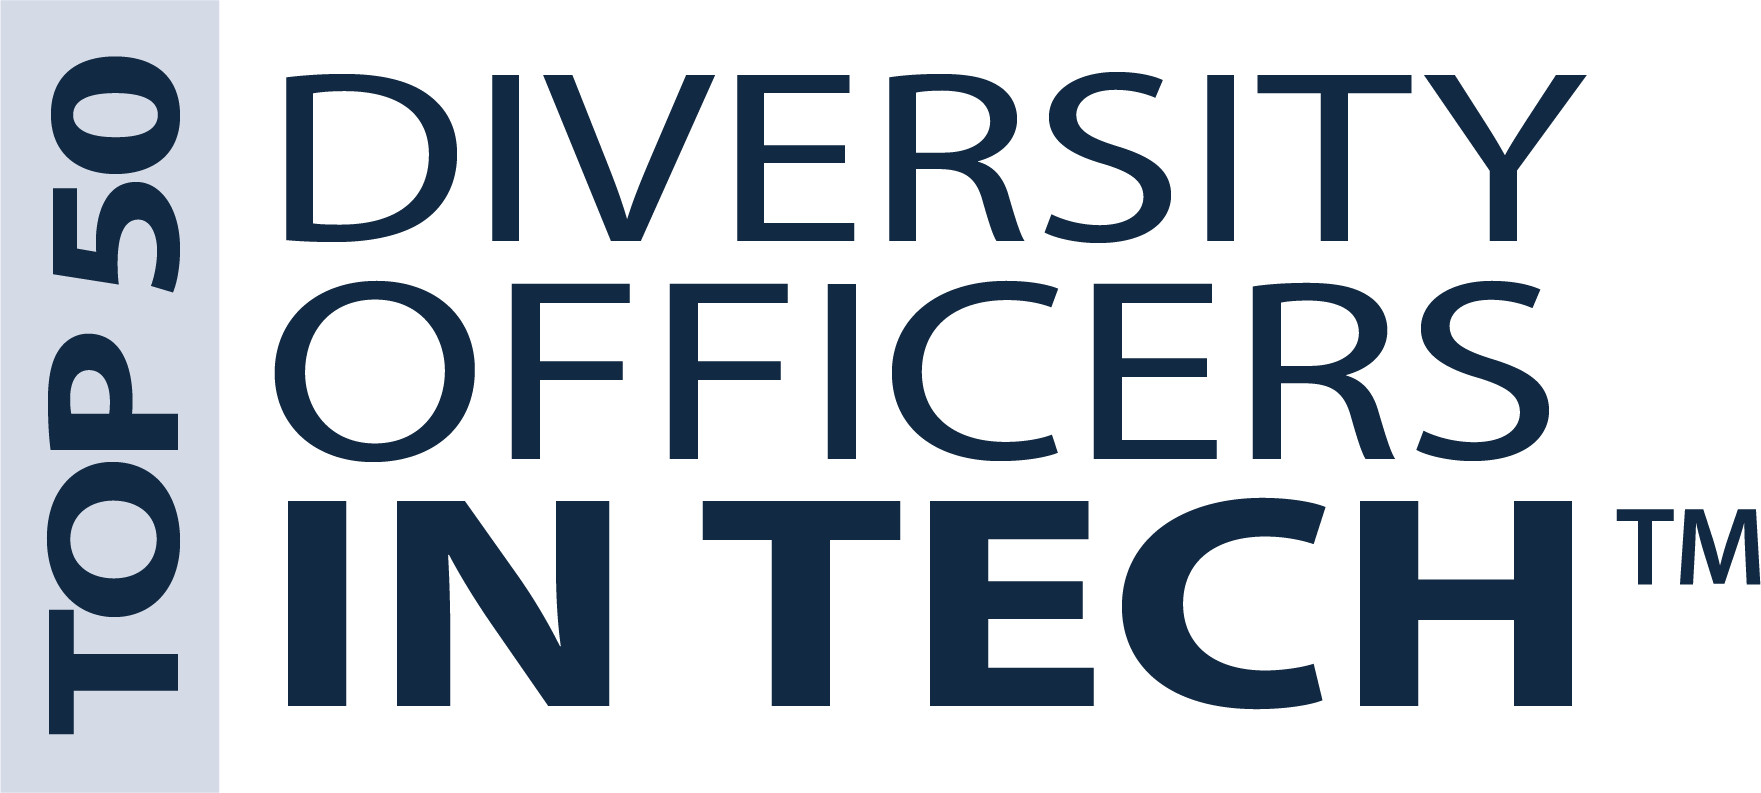 Top 50 Diversity Officers in Tech